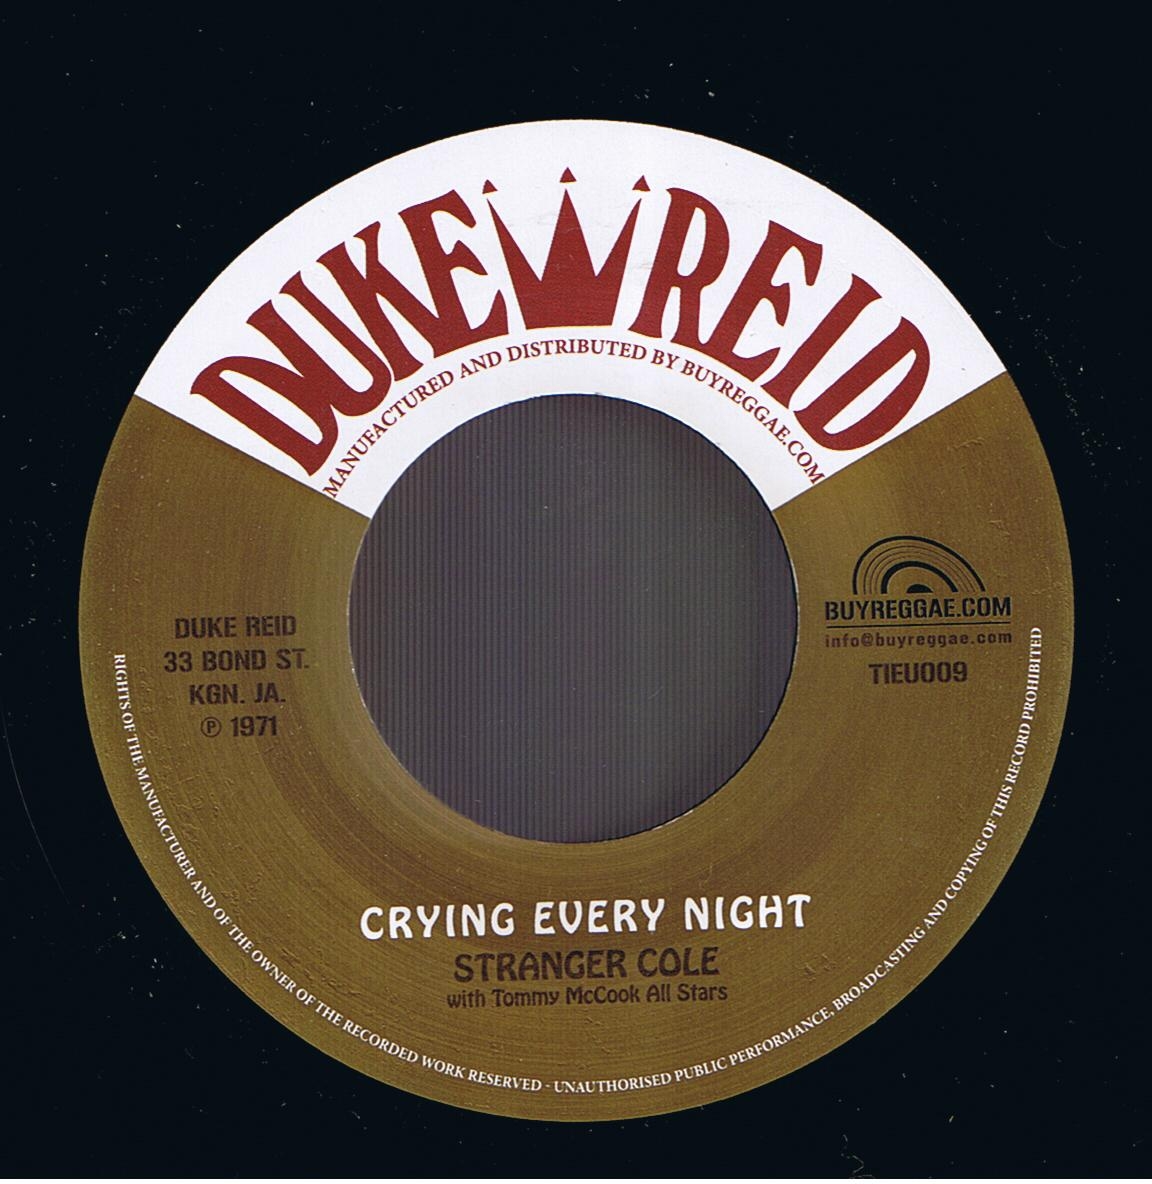 Stranger Cole - Crying Every Night / Tommy McCook - Mighty Alley (7")